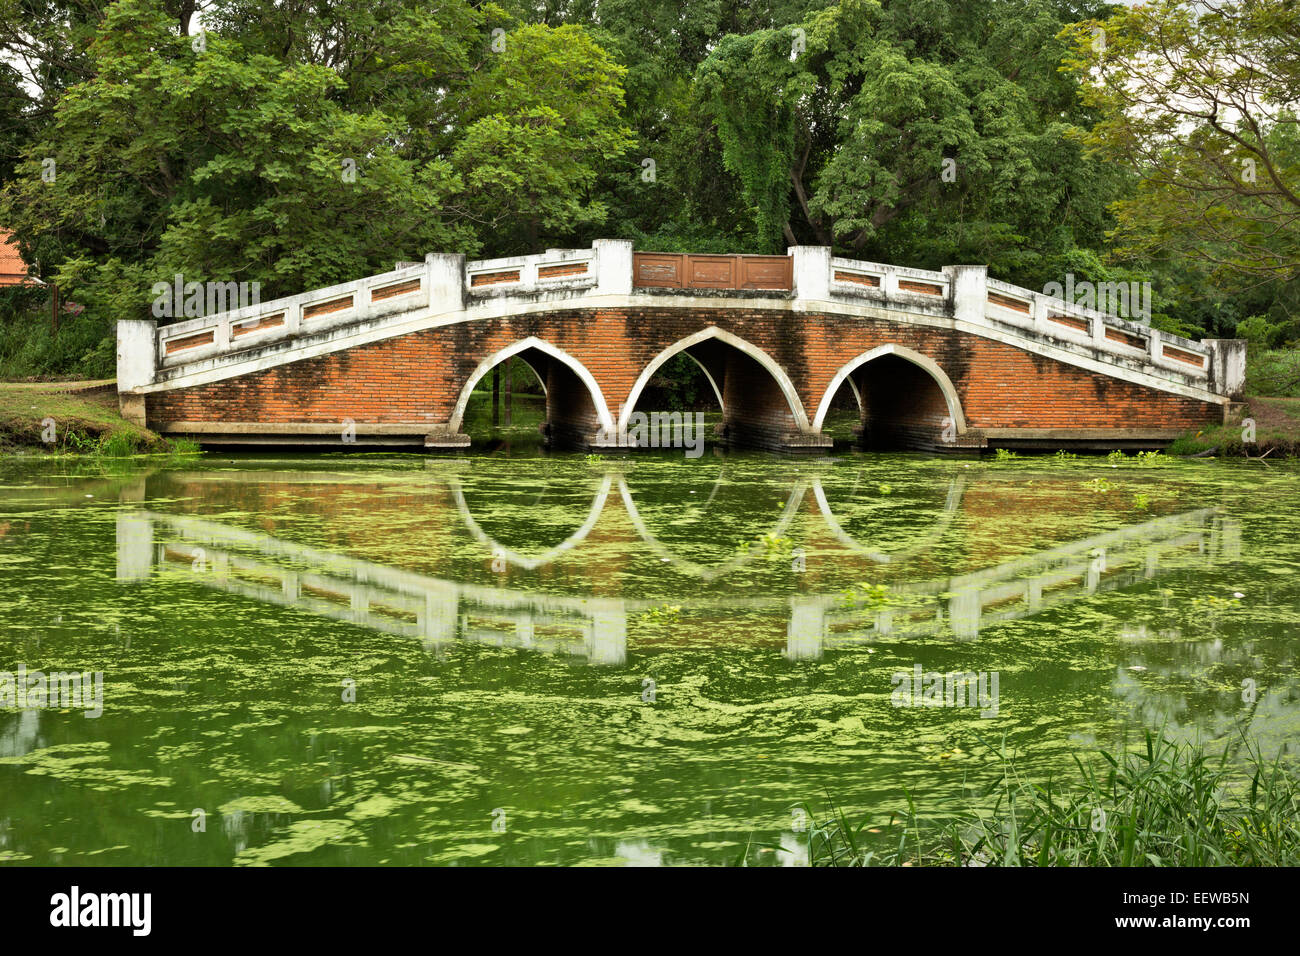 TH00323-00...THAILAND - Bridge over a canal in the Phra Ram Park located at the center of the Ayutthaya Historical Park. Stock Photo